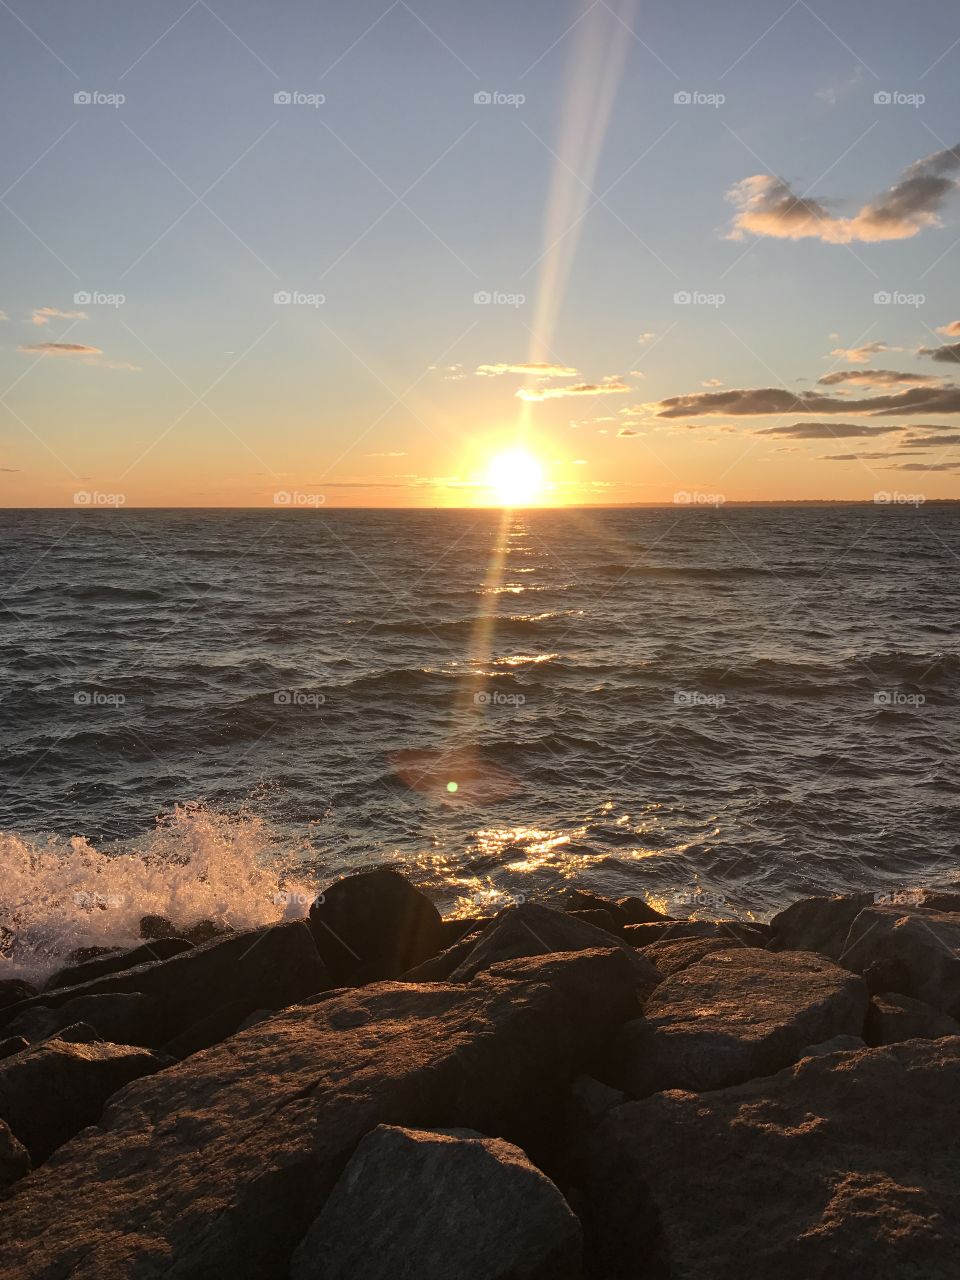 Sunsets in Rhode Island. Waves crashing upon the rocks with the sun shining above as it sets 